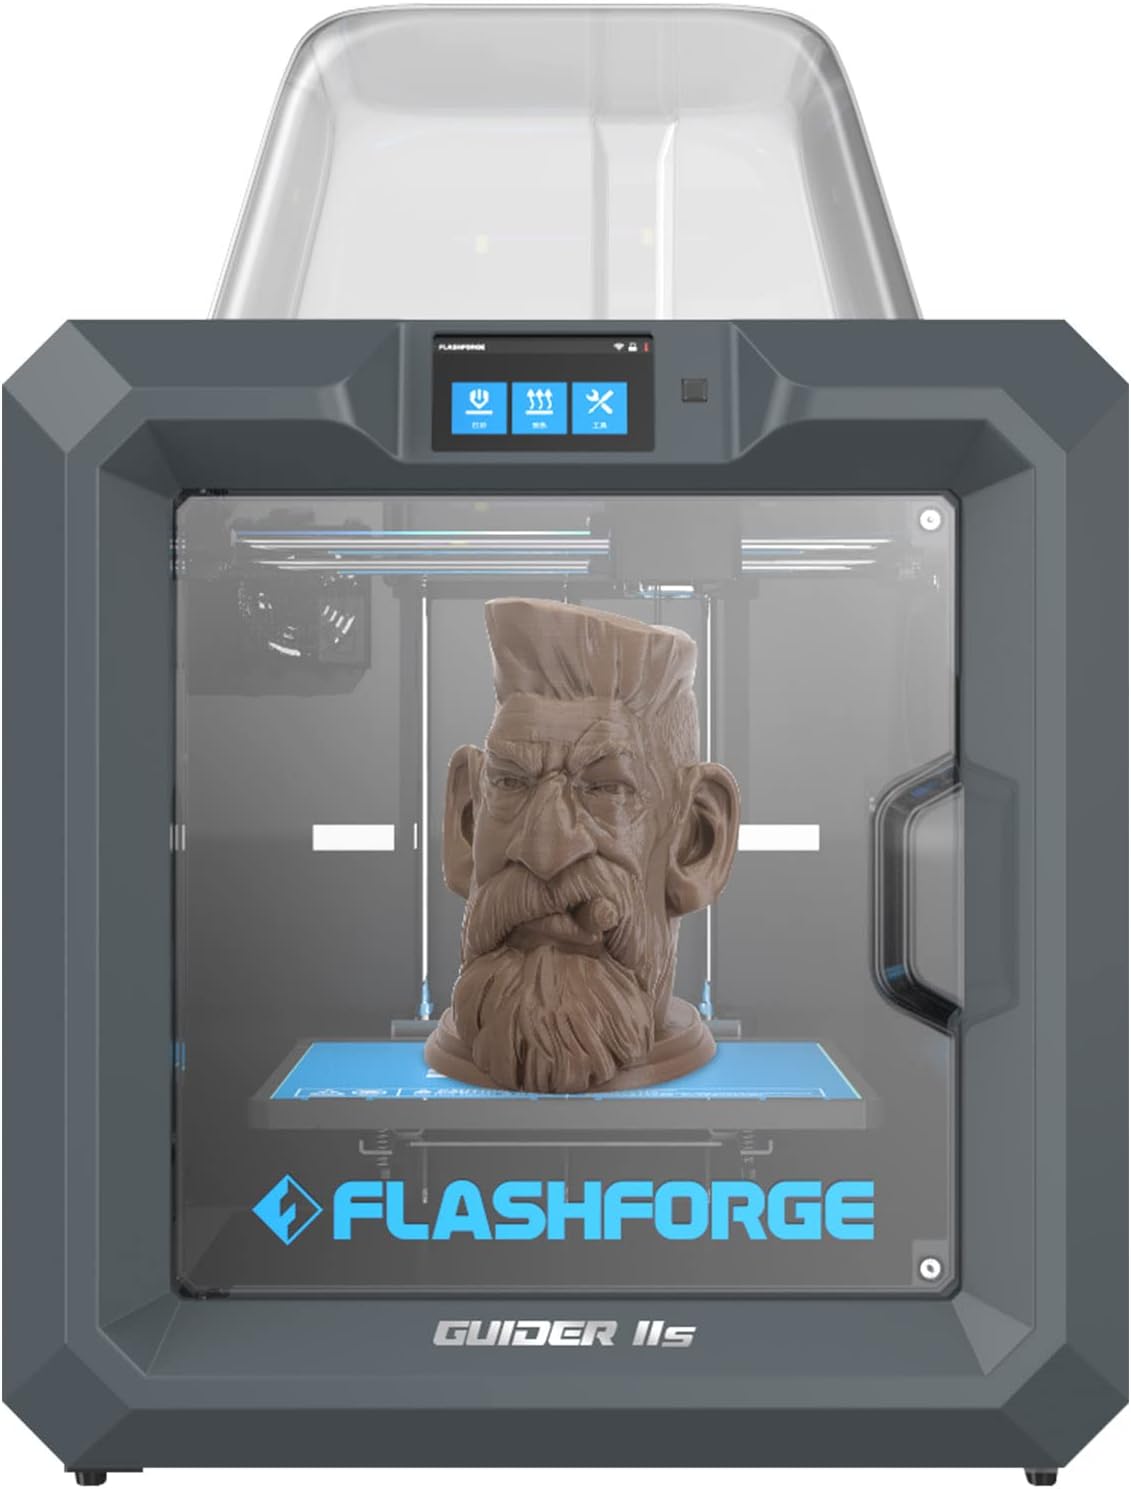 FLASHFORGE Guider IIS 3D Printer Auto Leveling with [...]